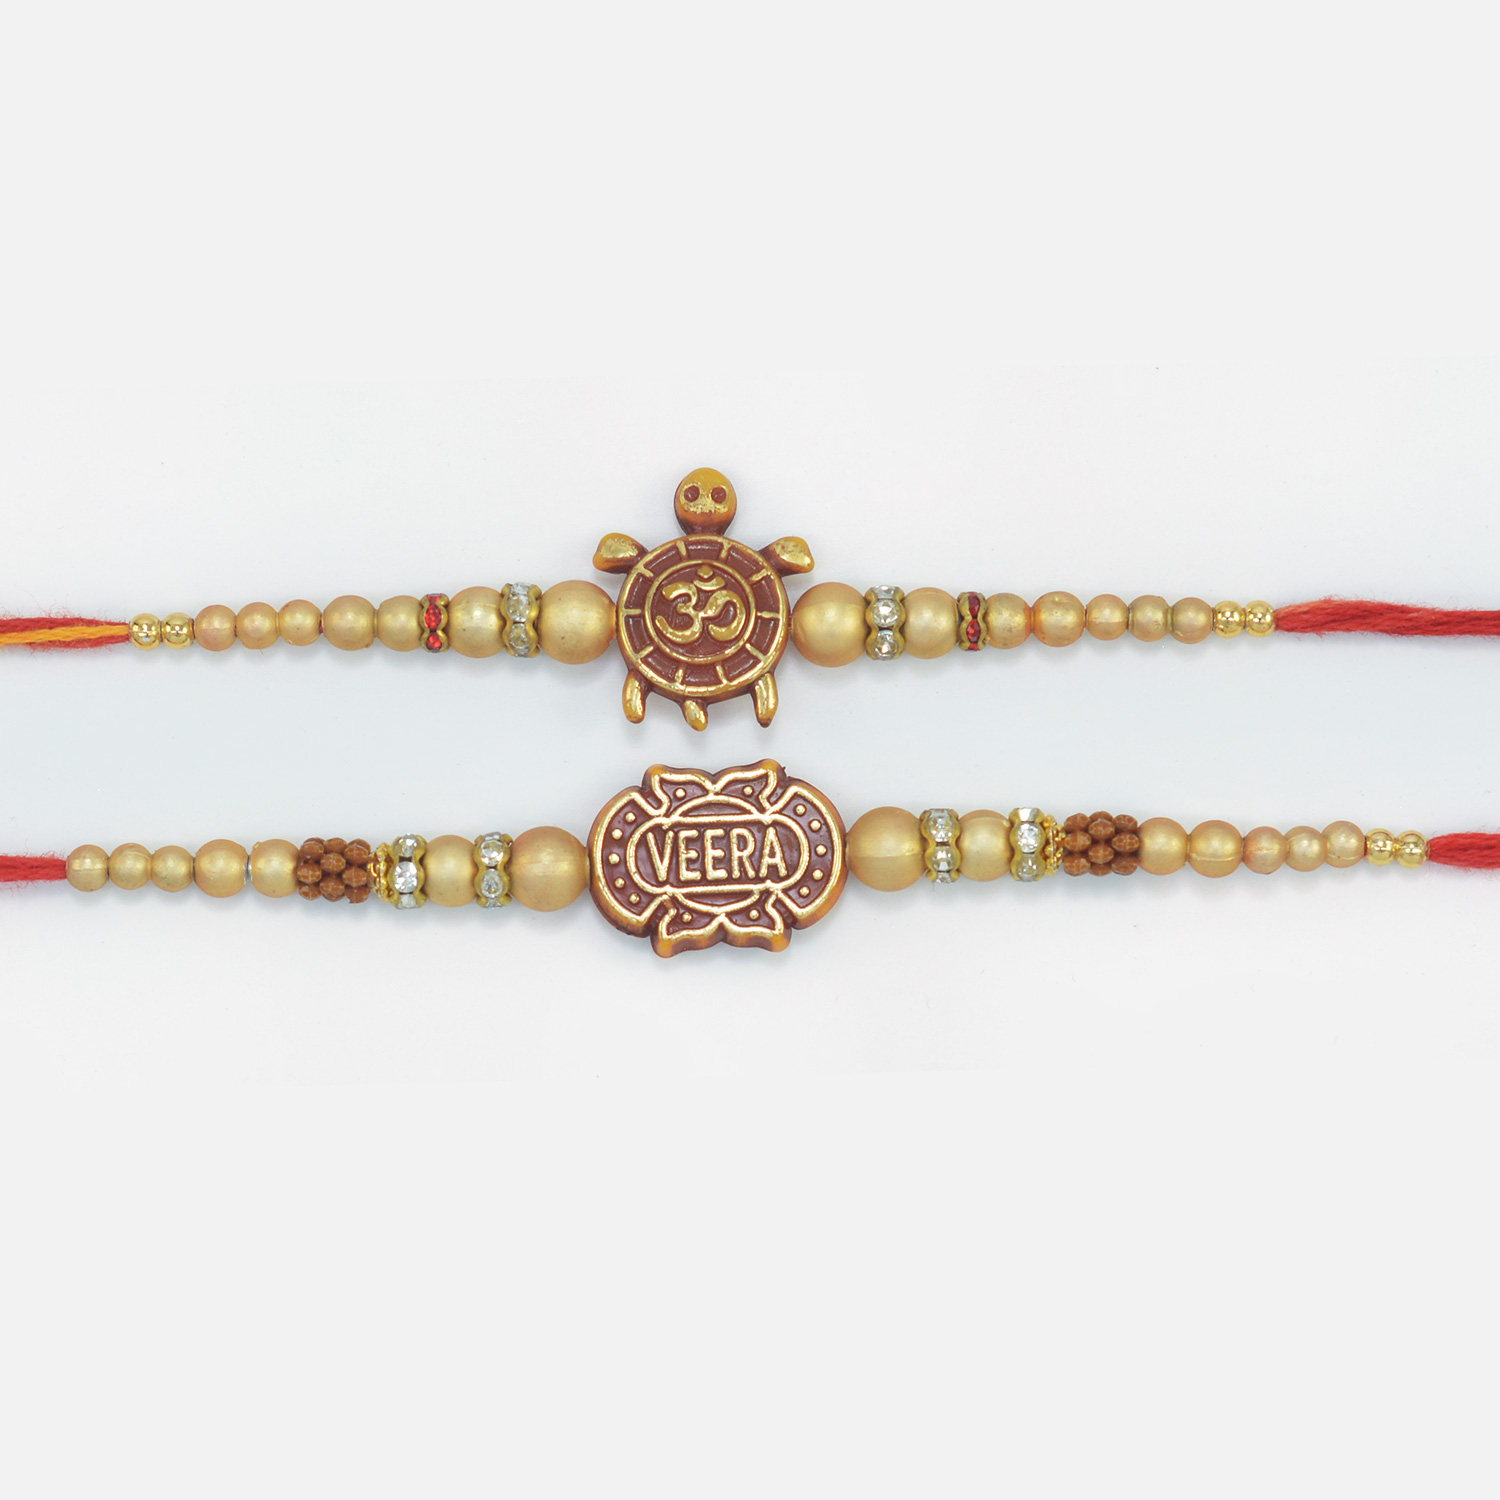 Om Written on Tortoise with Veers Written Stylish Rakhis for 2 Brothers